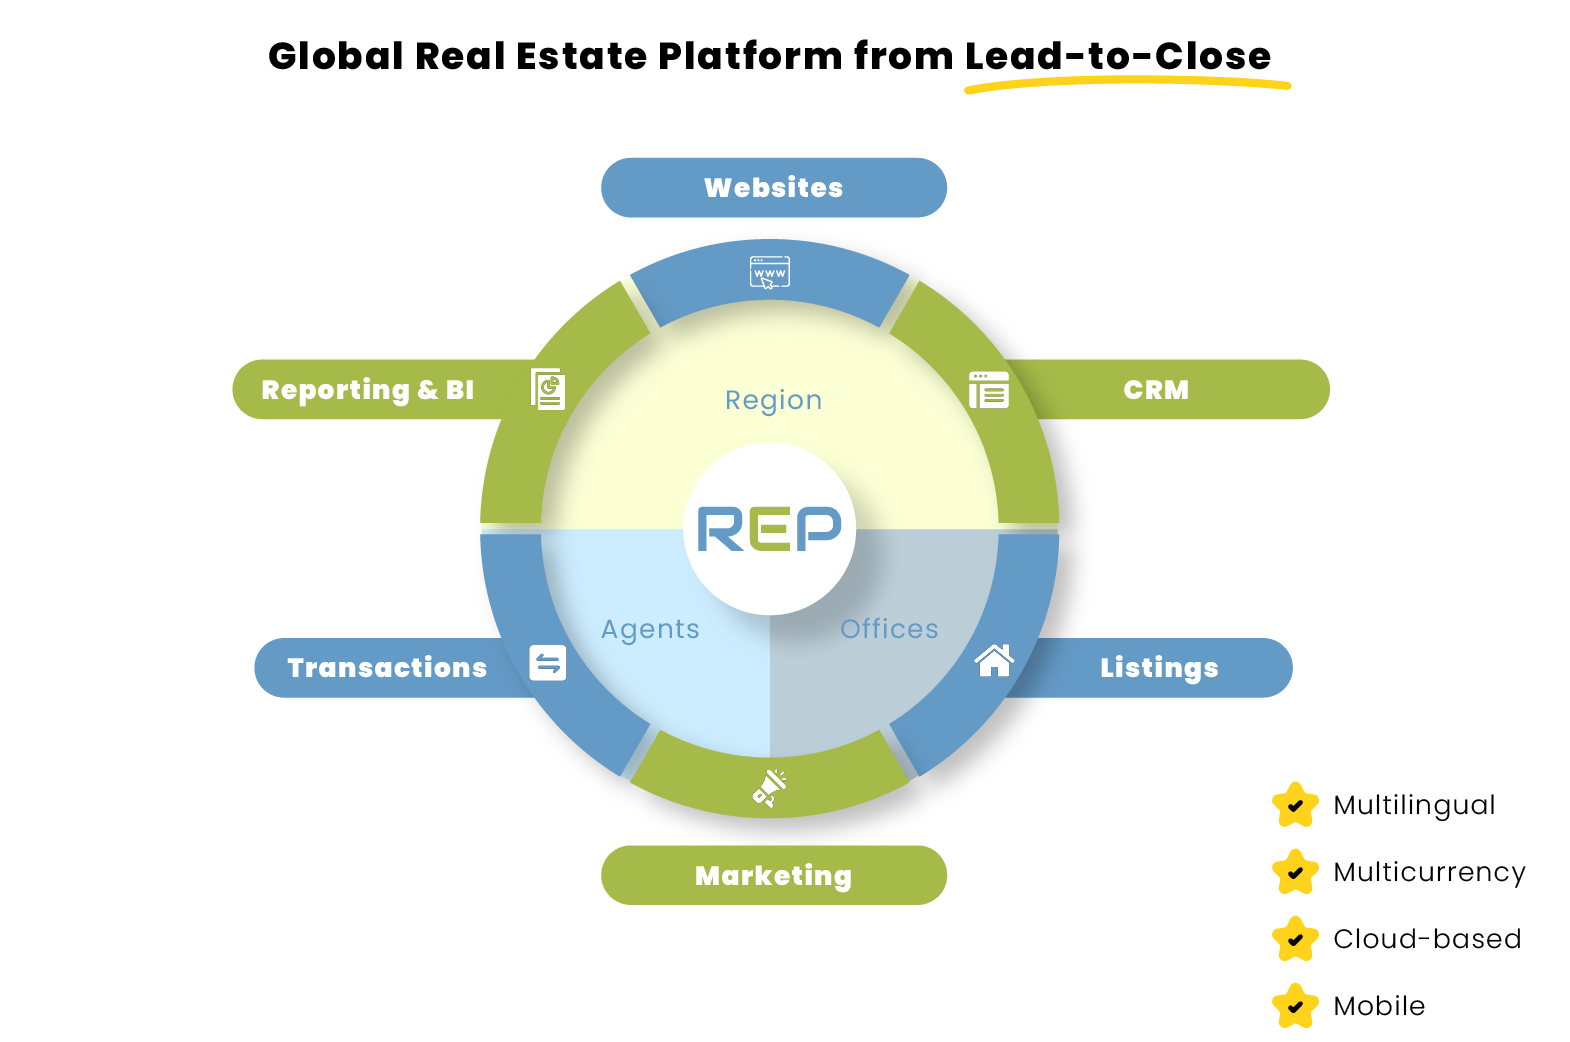 A complete lead-to-close real estate platform